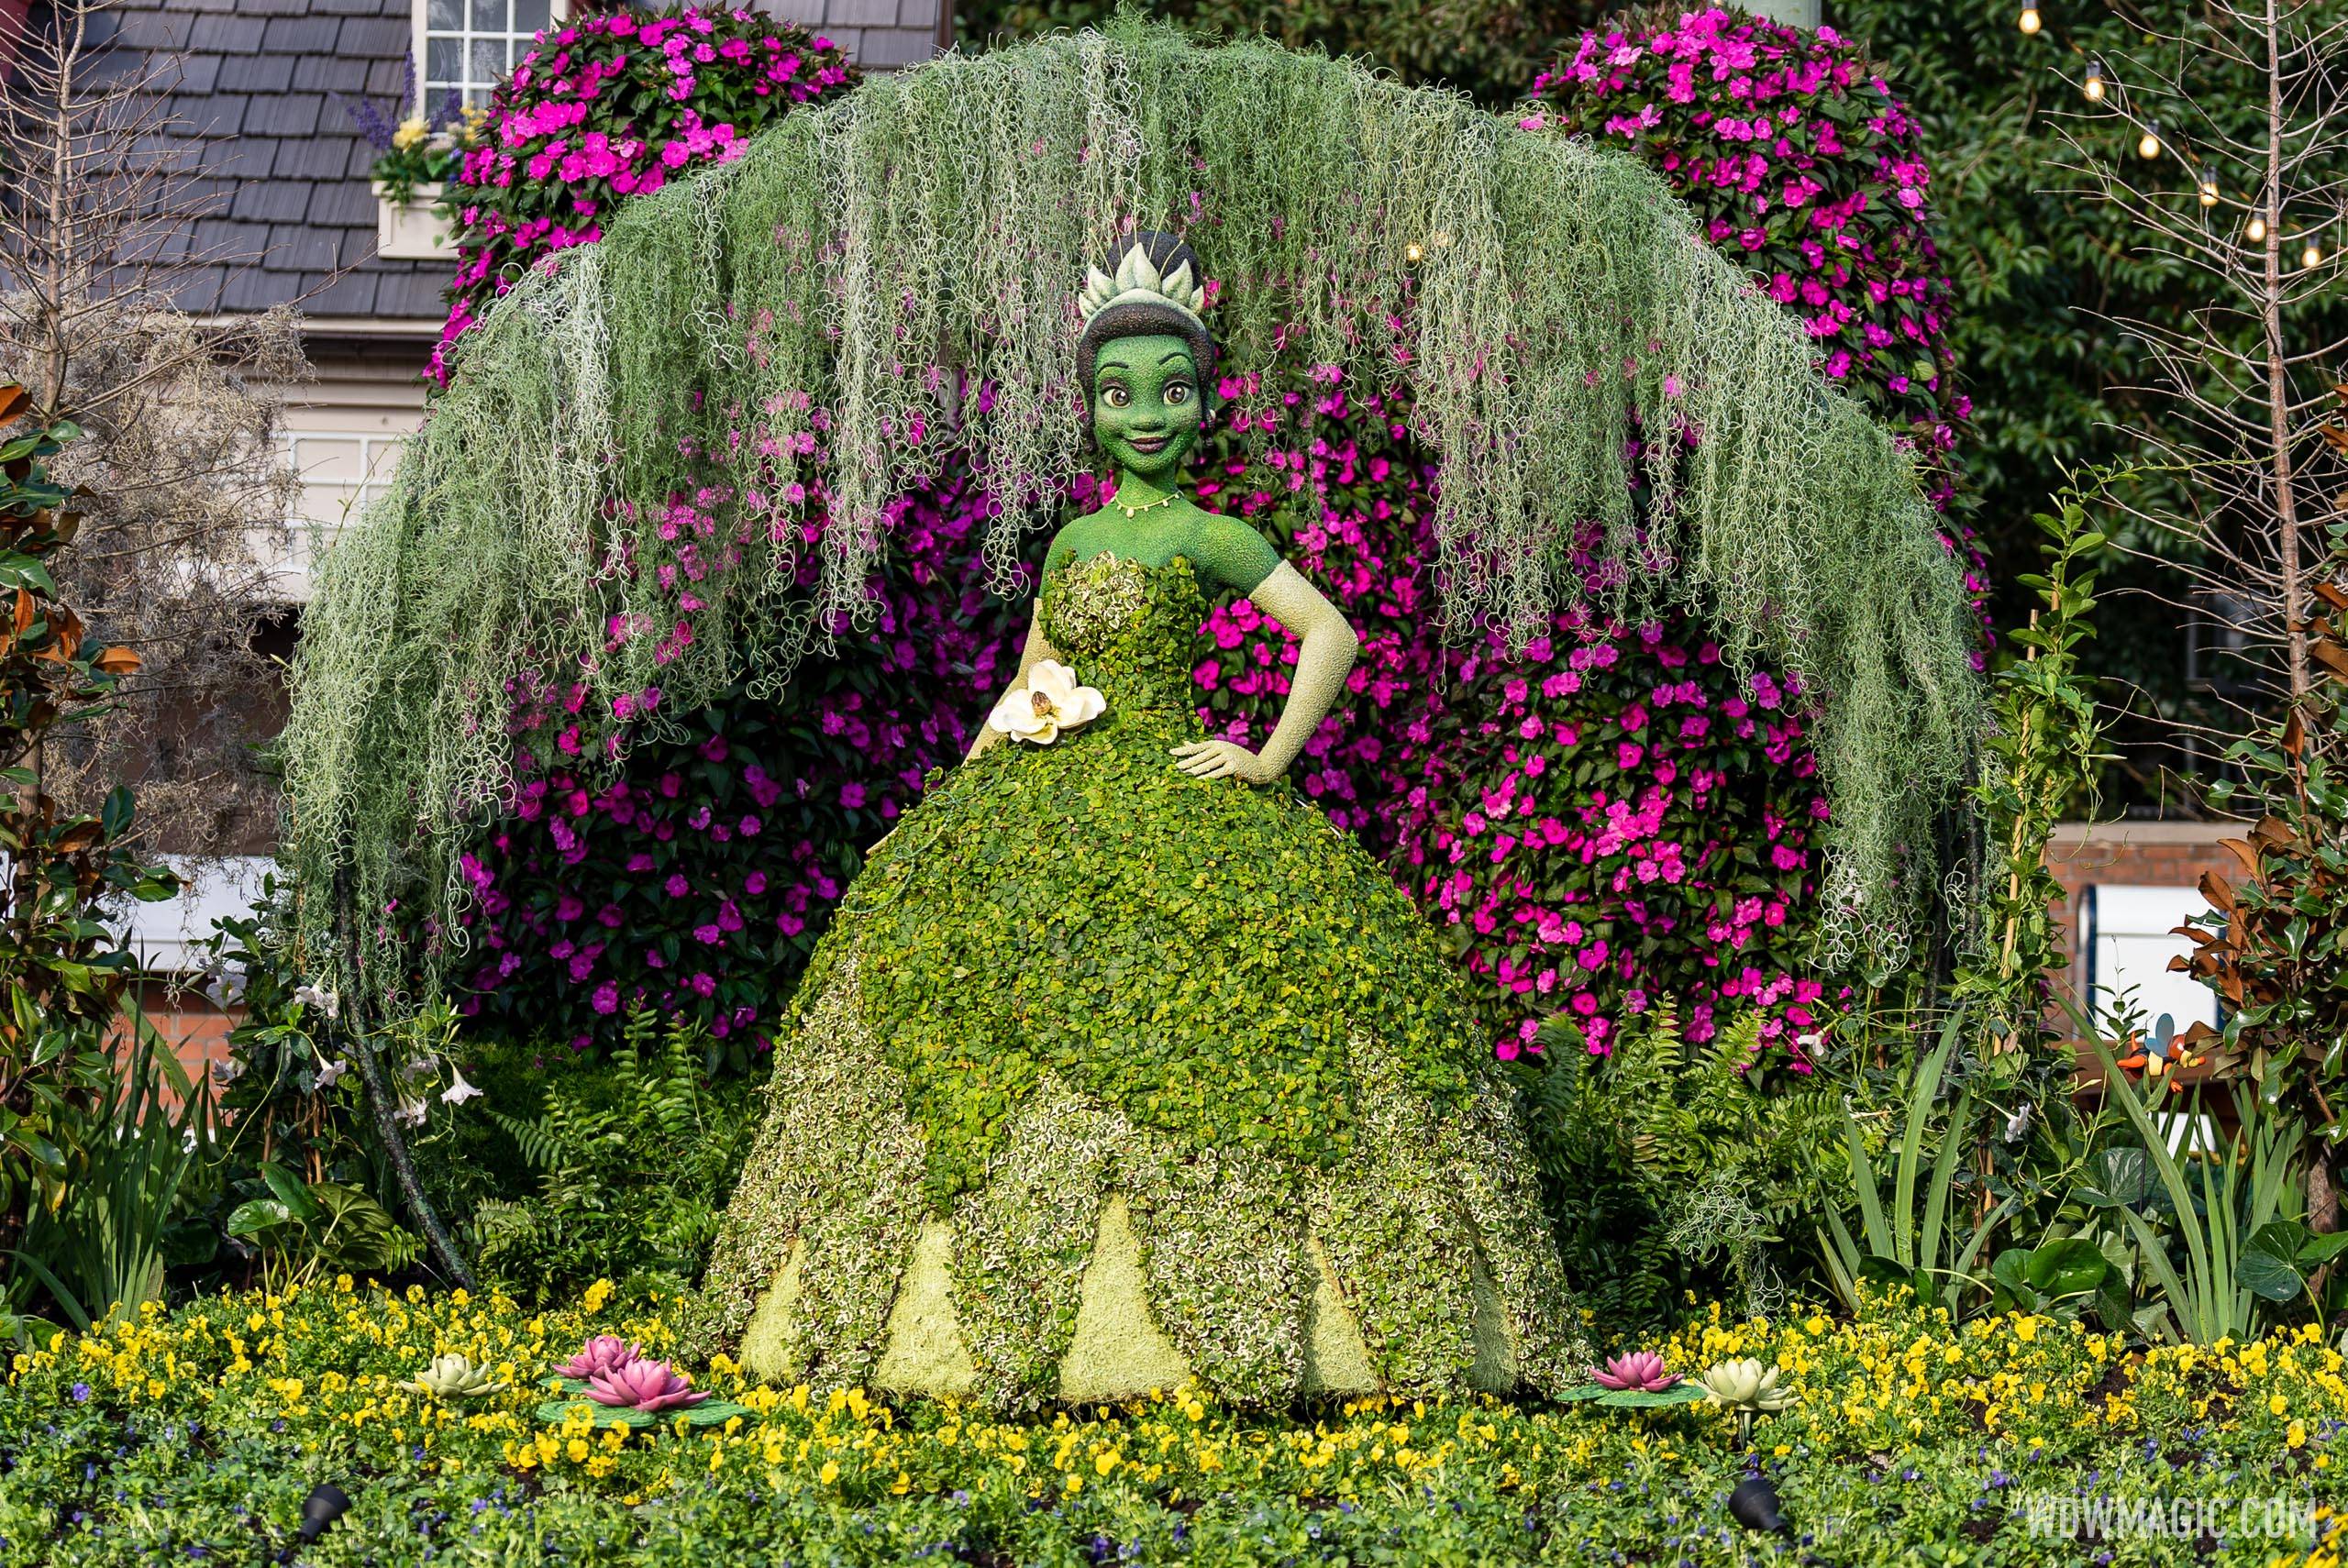 2023 Flower and Garden Festival - Princess Tiana topiary display